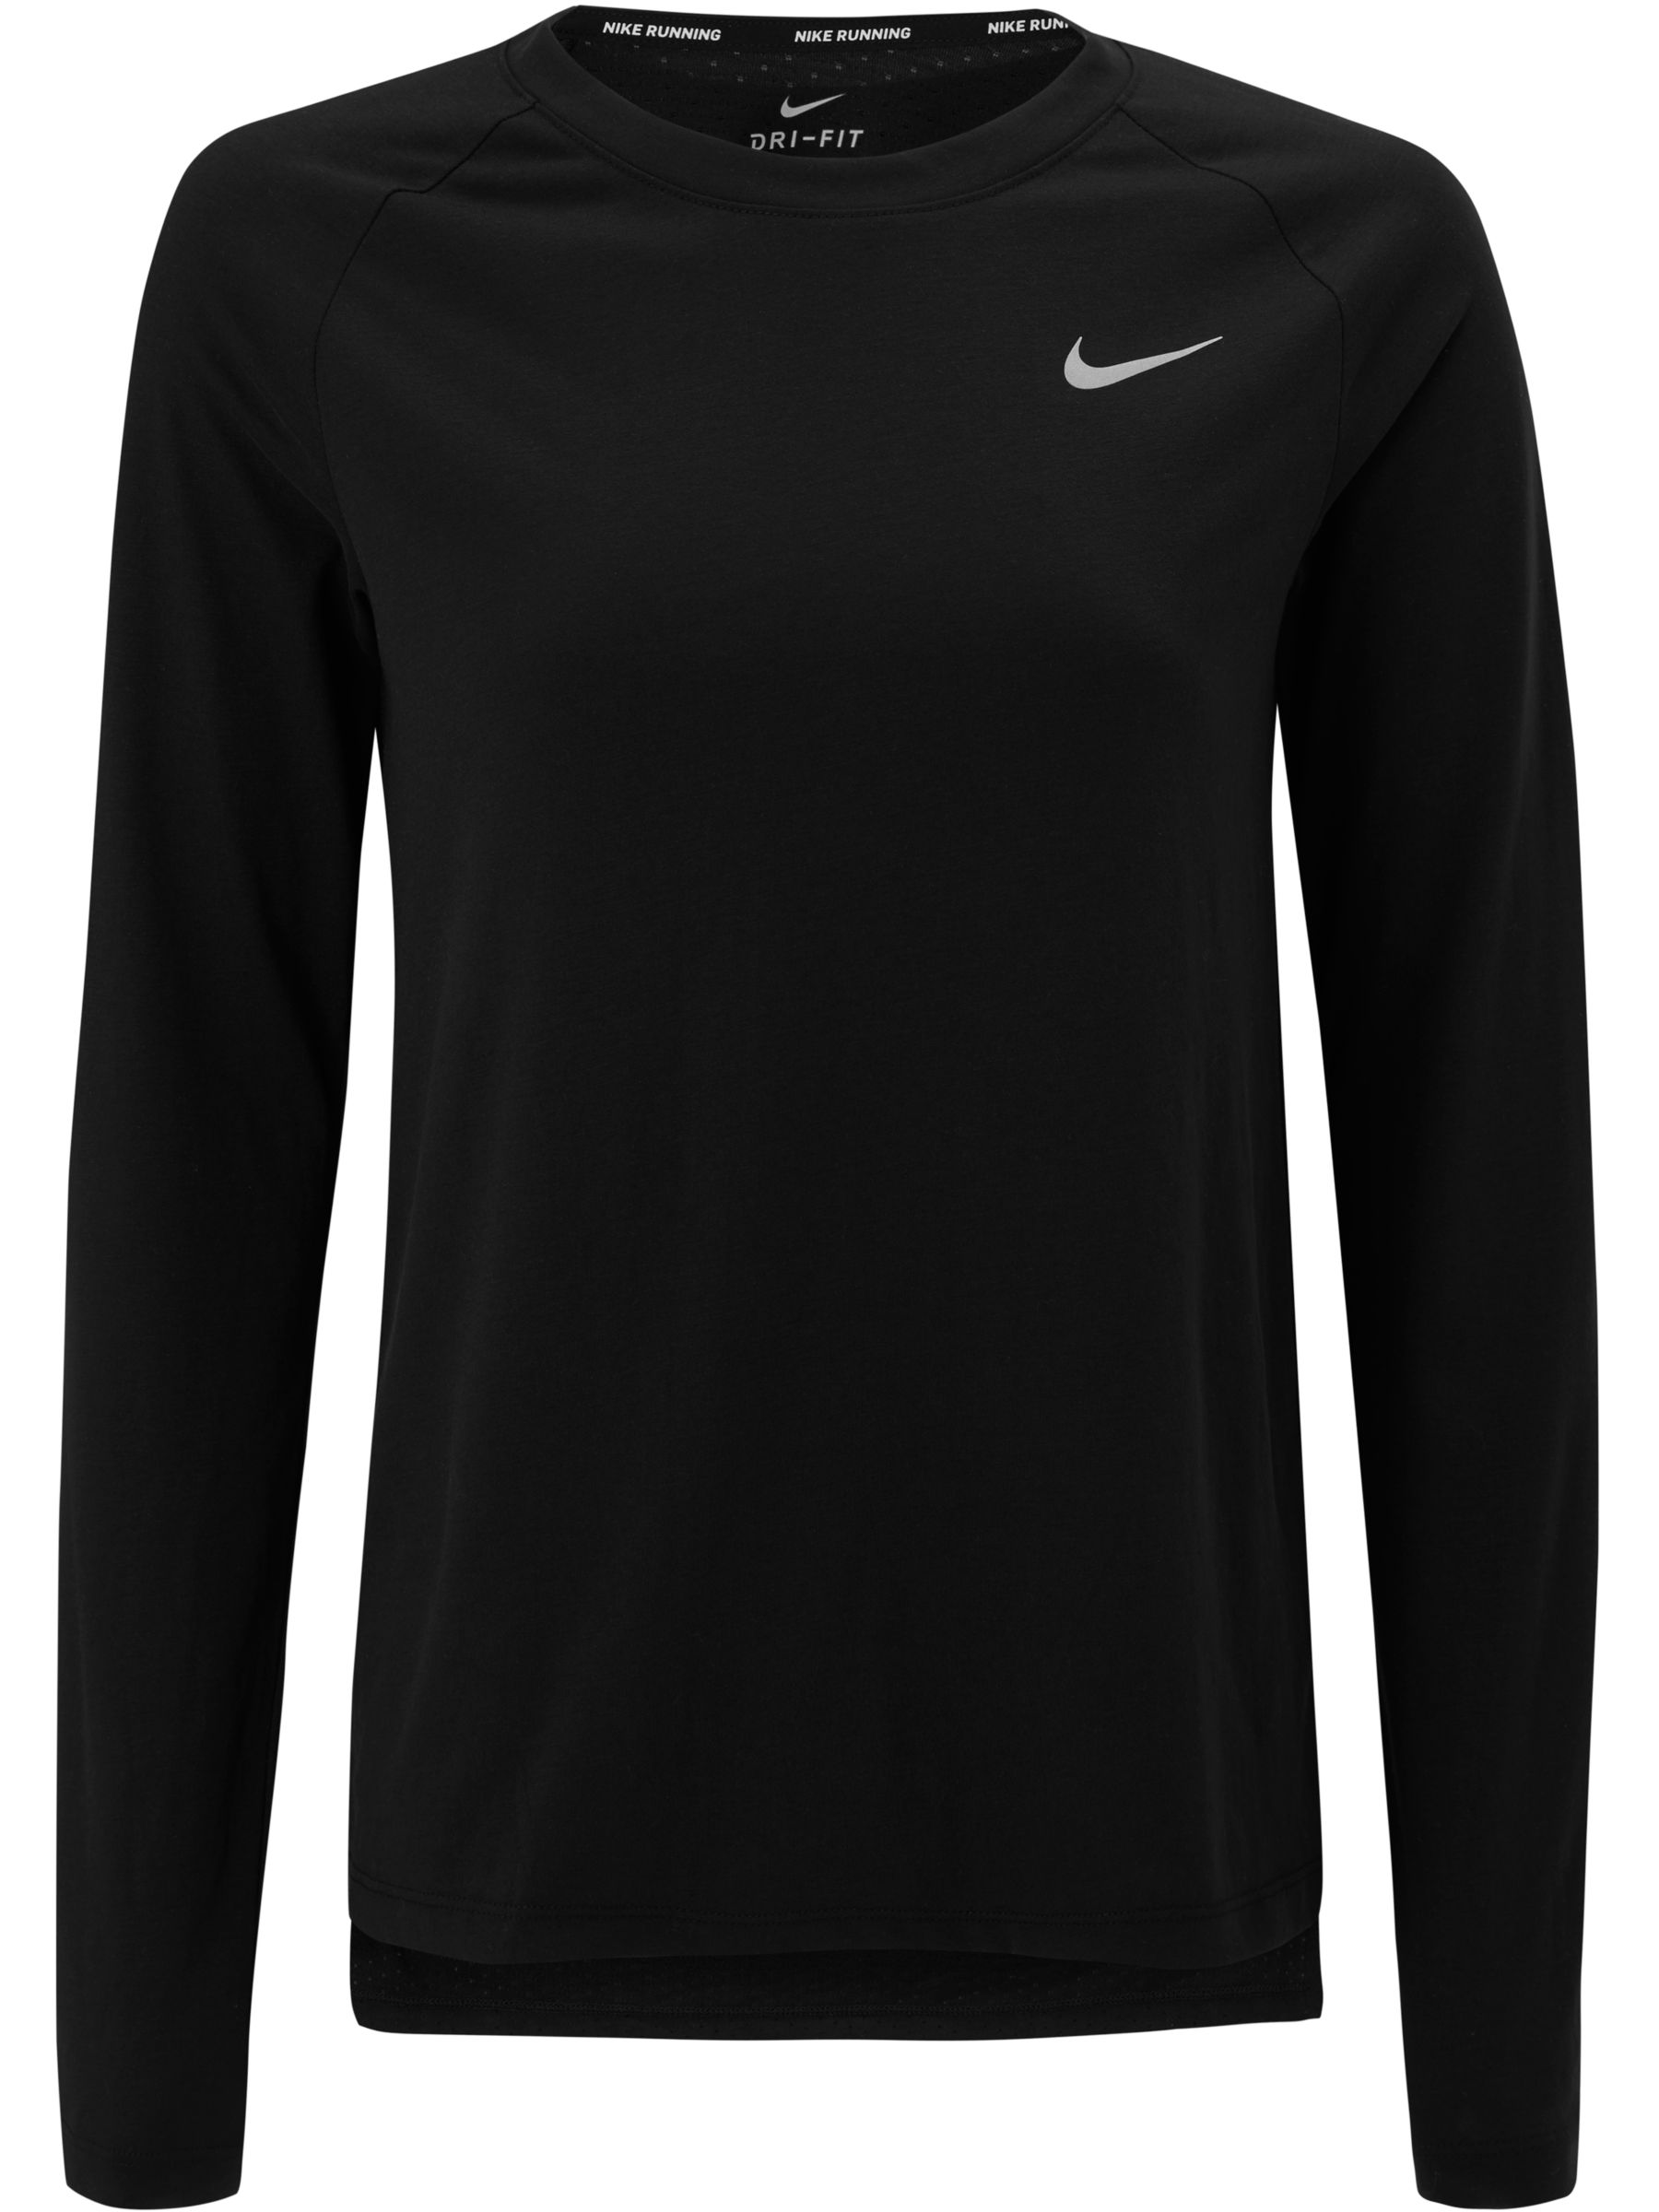 Nike Womens Tailwind Long-Sleeve Running Top Women Clothing Sports & Fitness Clothing